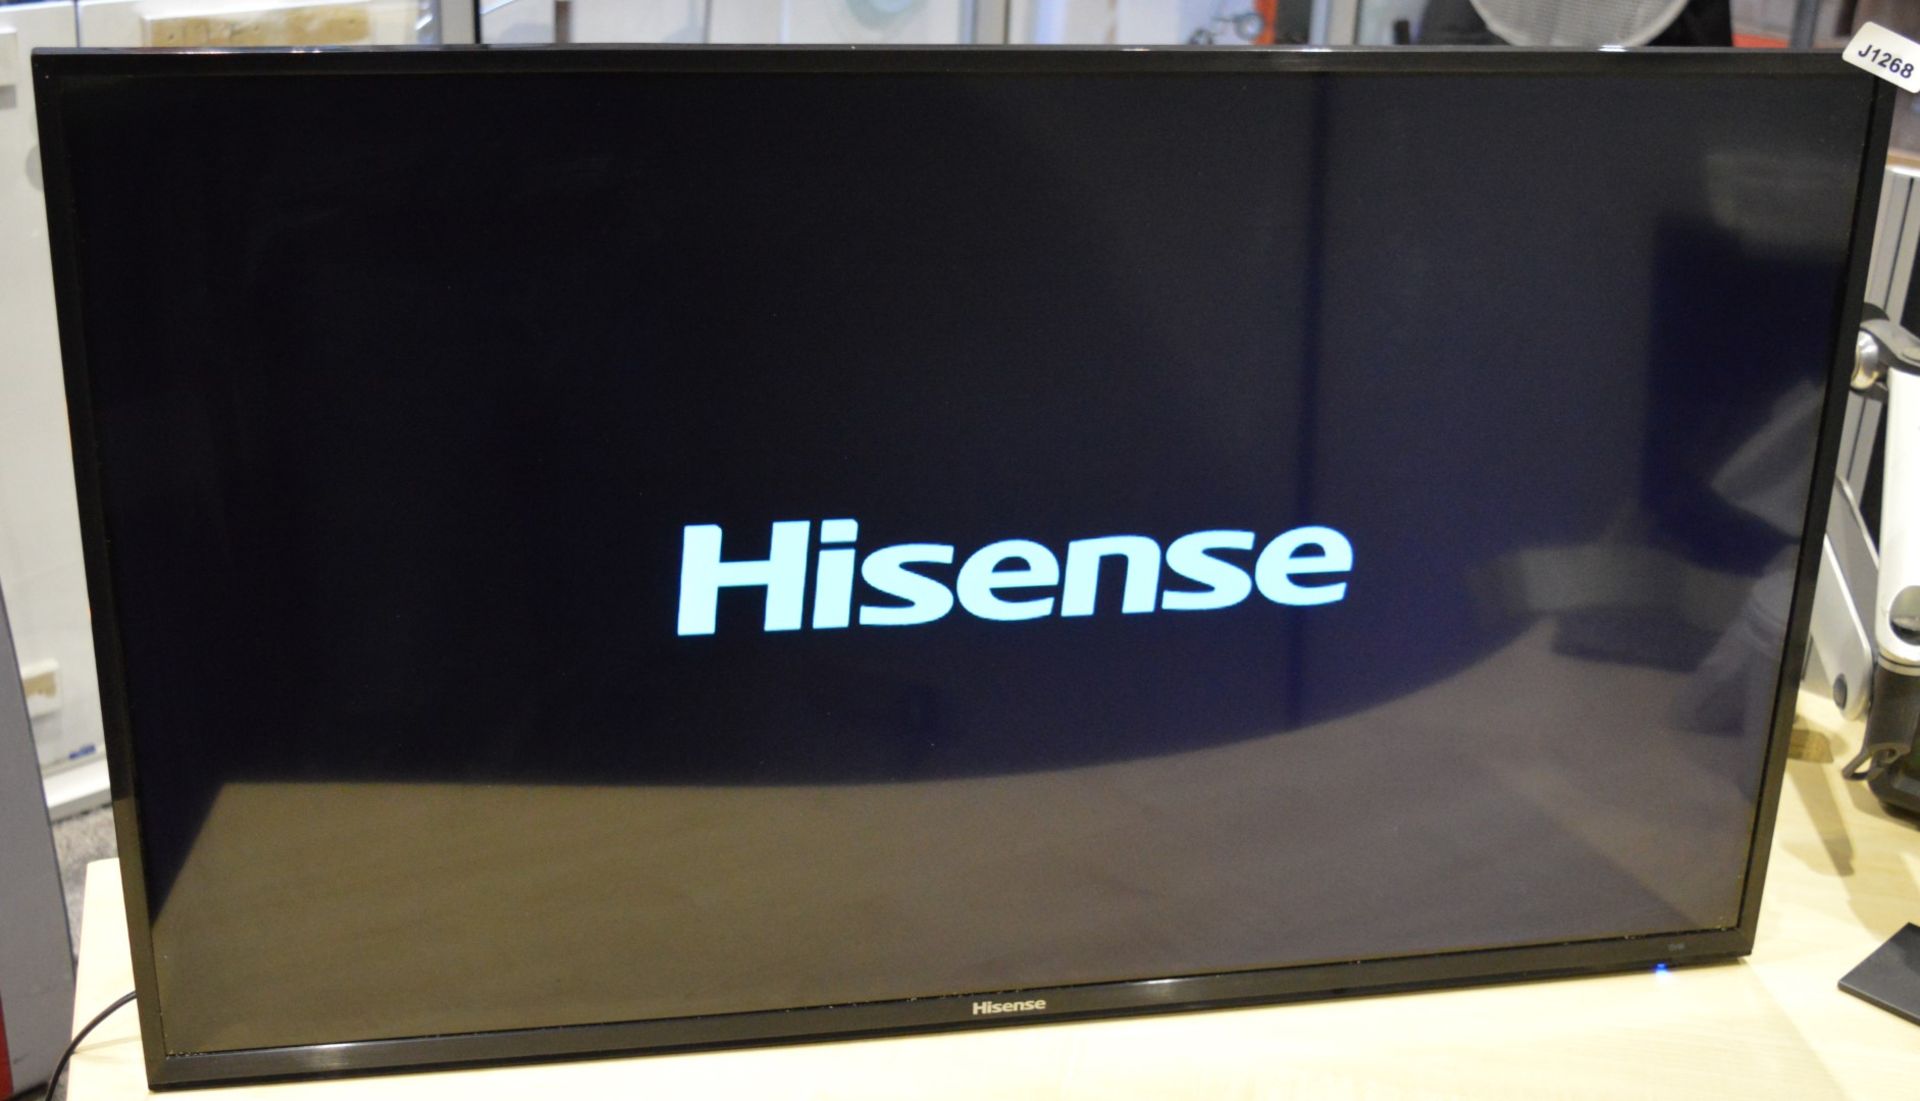 1 x Hisense 40 Inch Full HD Television With Built in Freeview and USB Digital Media Player - - Image 2 of 6